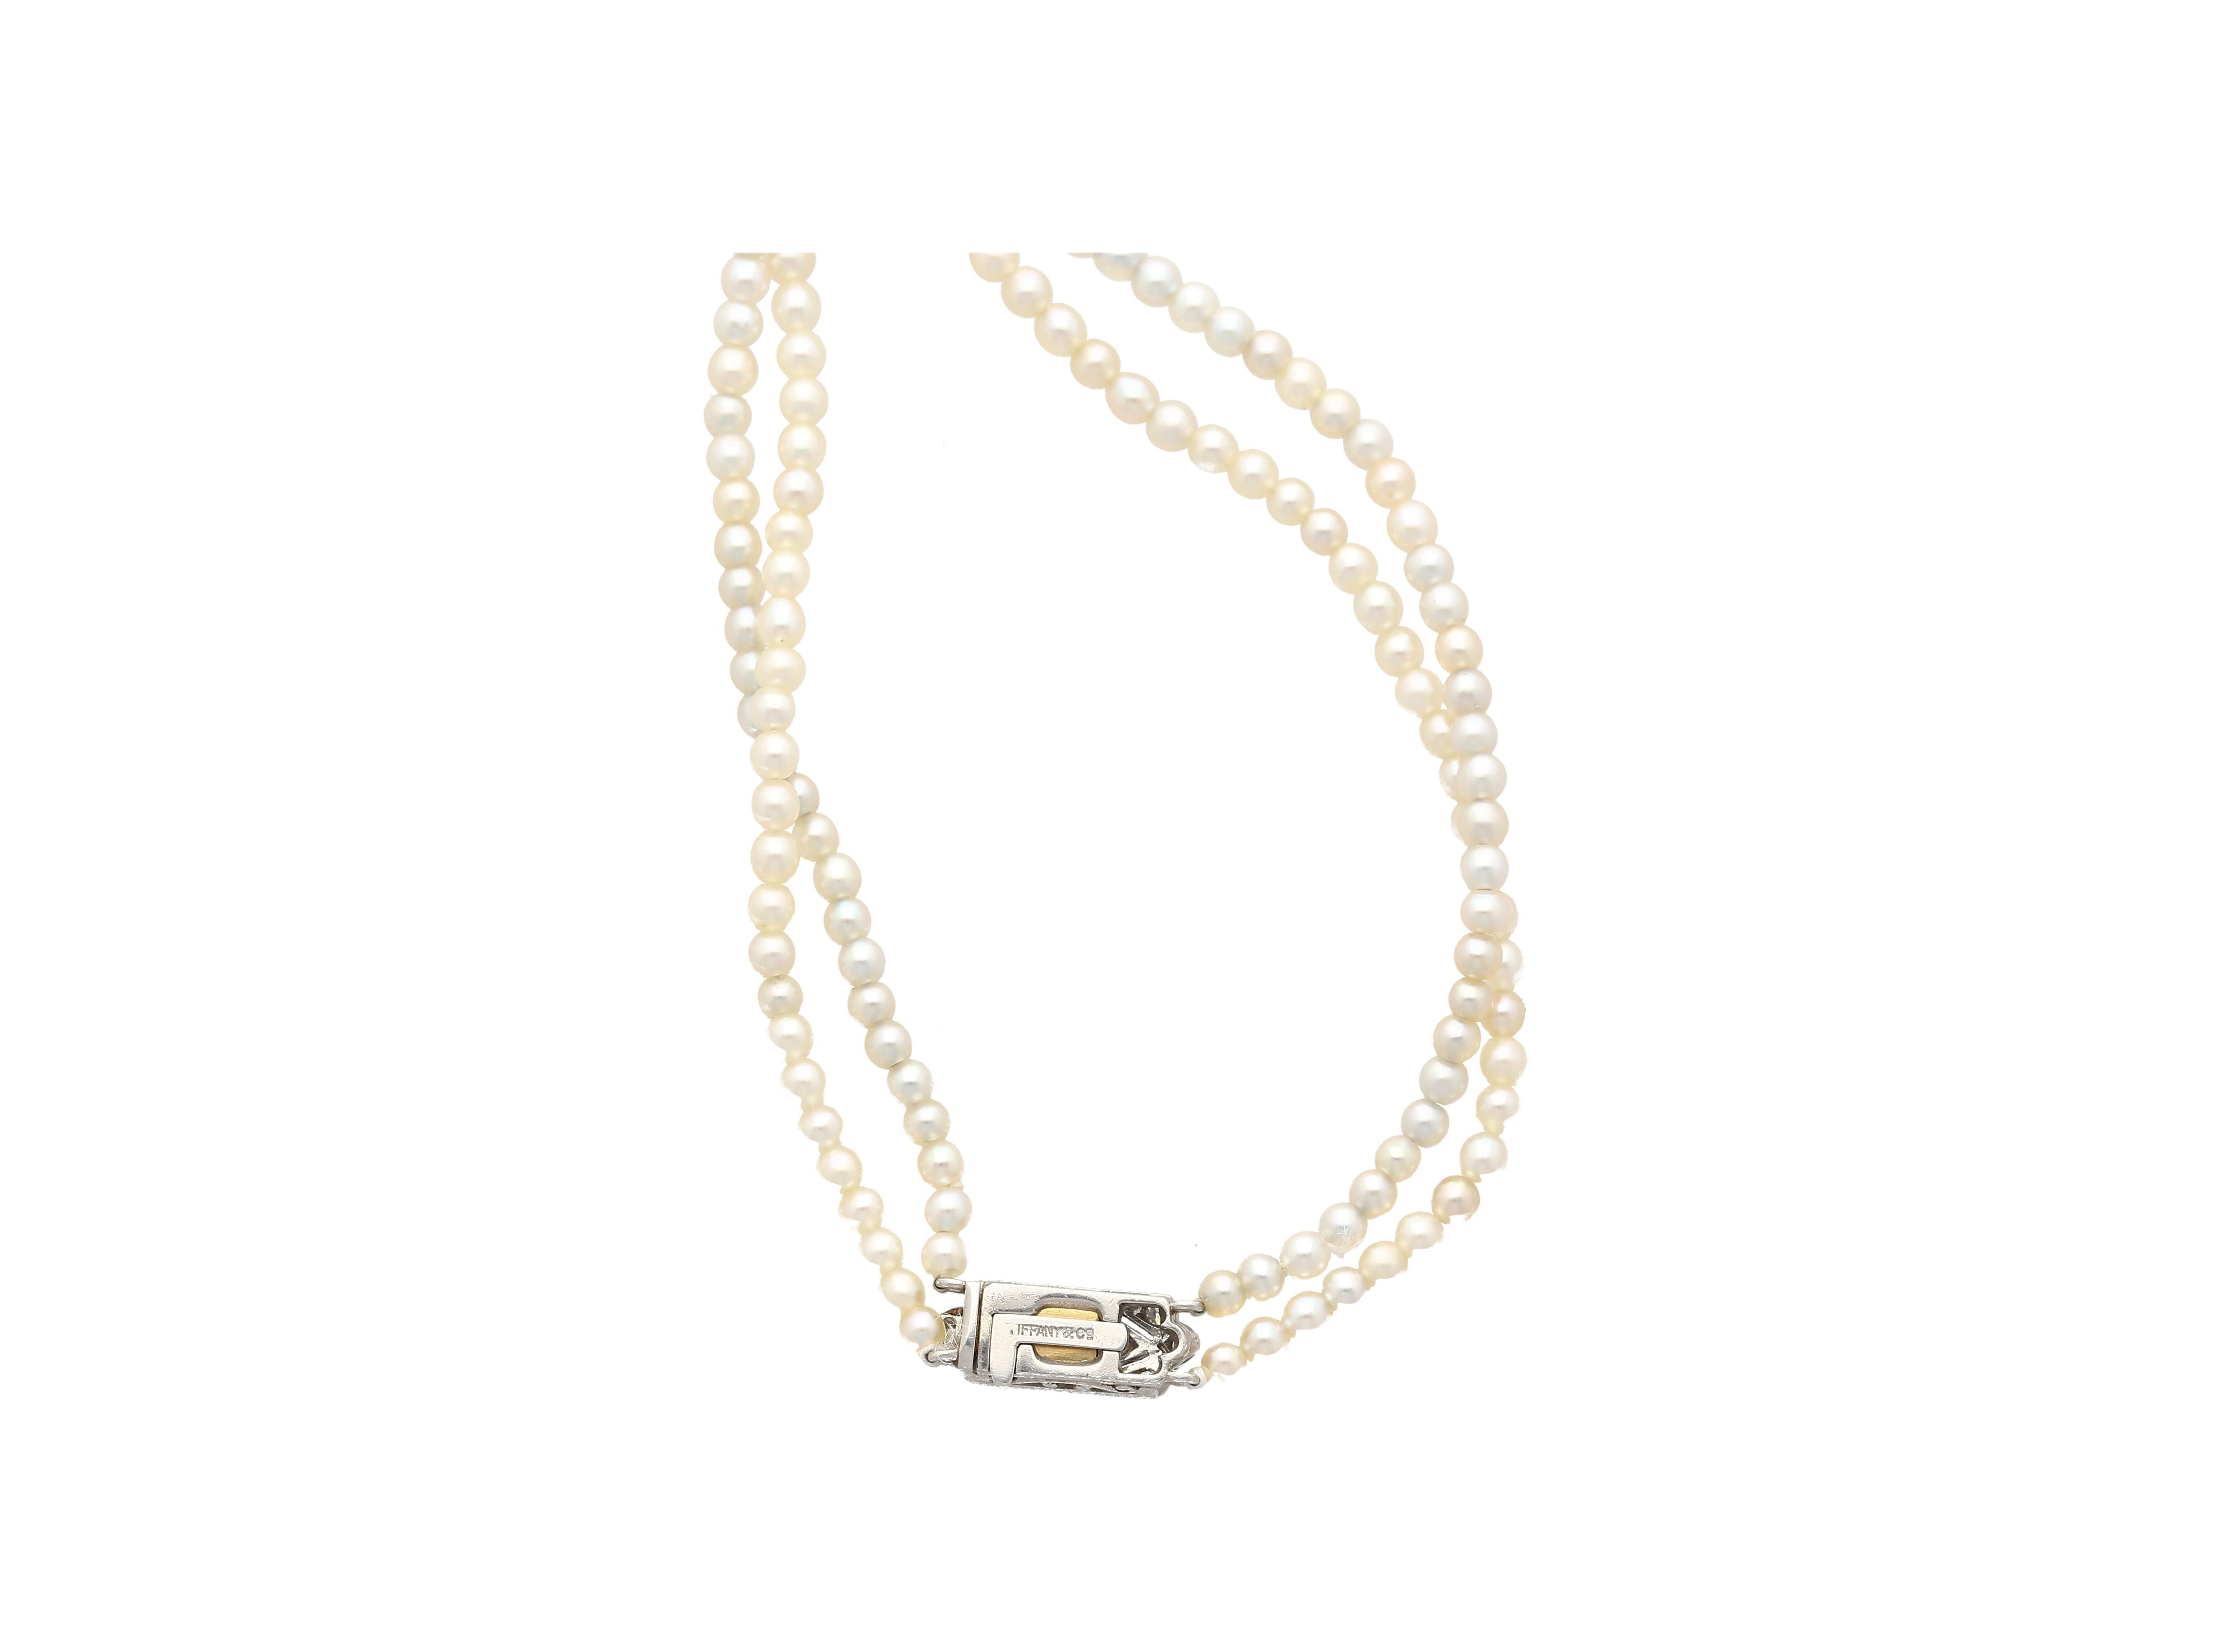 Tiffany & Co. signed vintage natural saltwater pearl double-stranded necklace with diamond box and safety closure. This necklace is a relic of history and an archetype of the pristine Tiffany & Co. craftsmanship and quality materials. Featuring 224